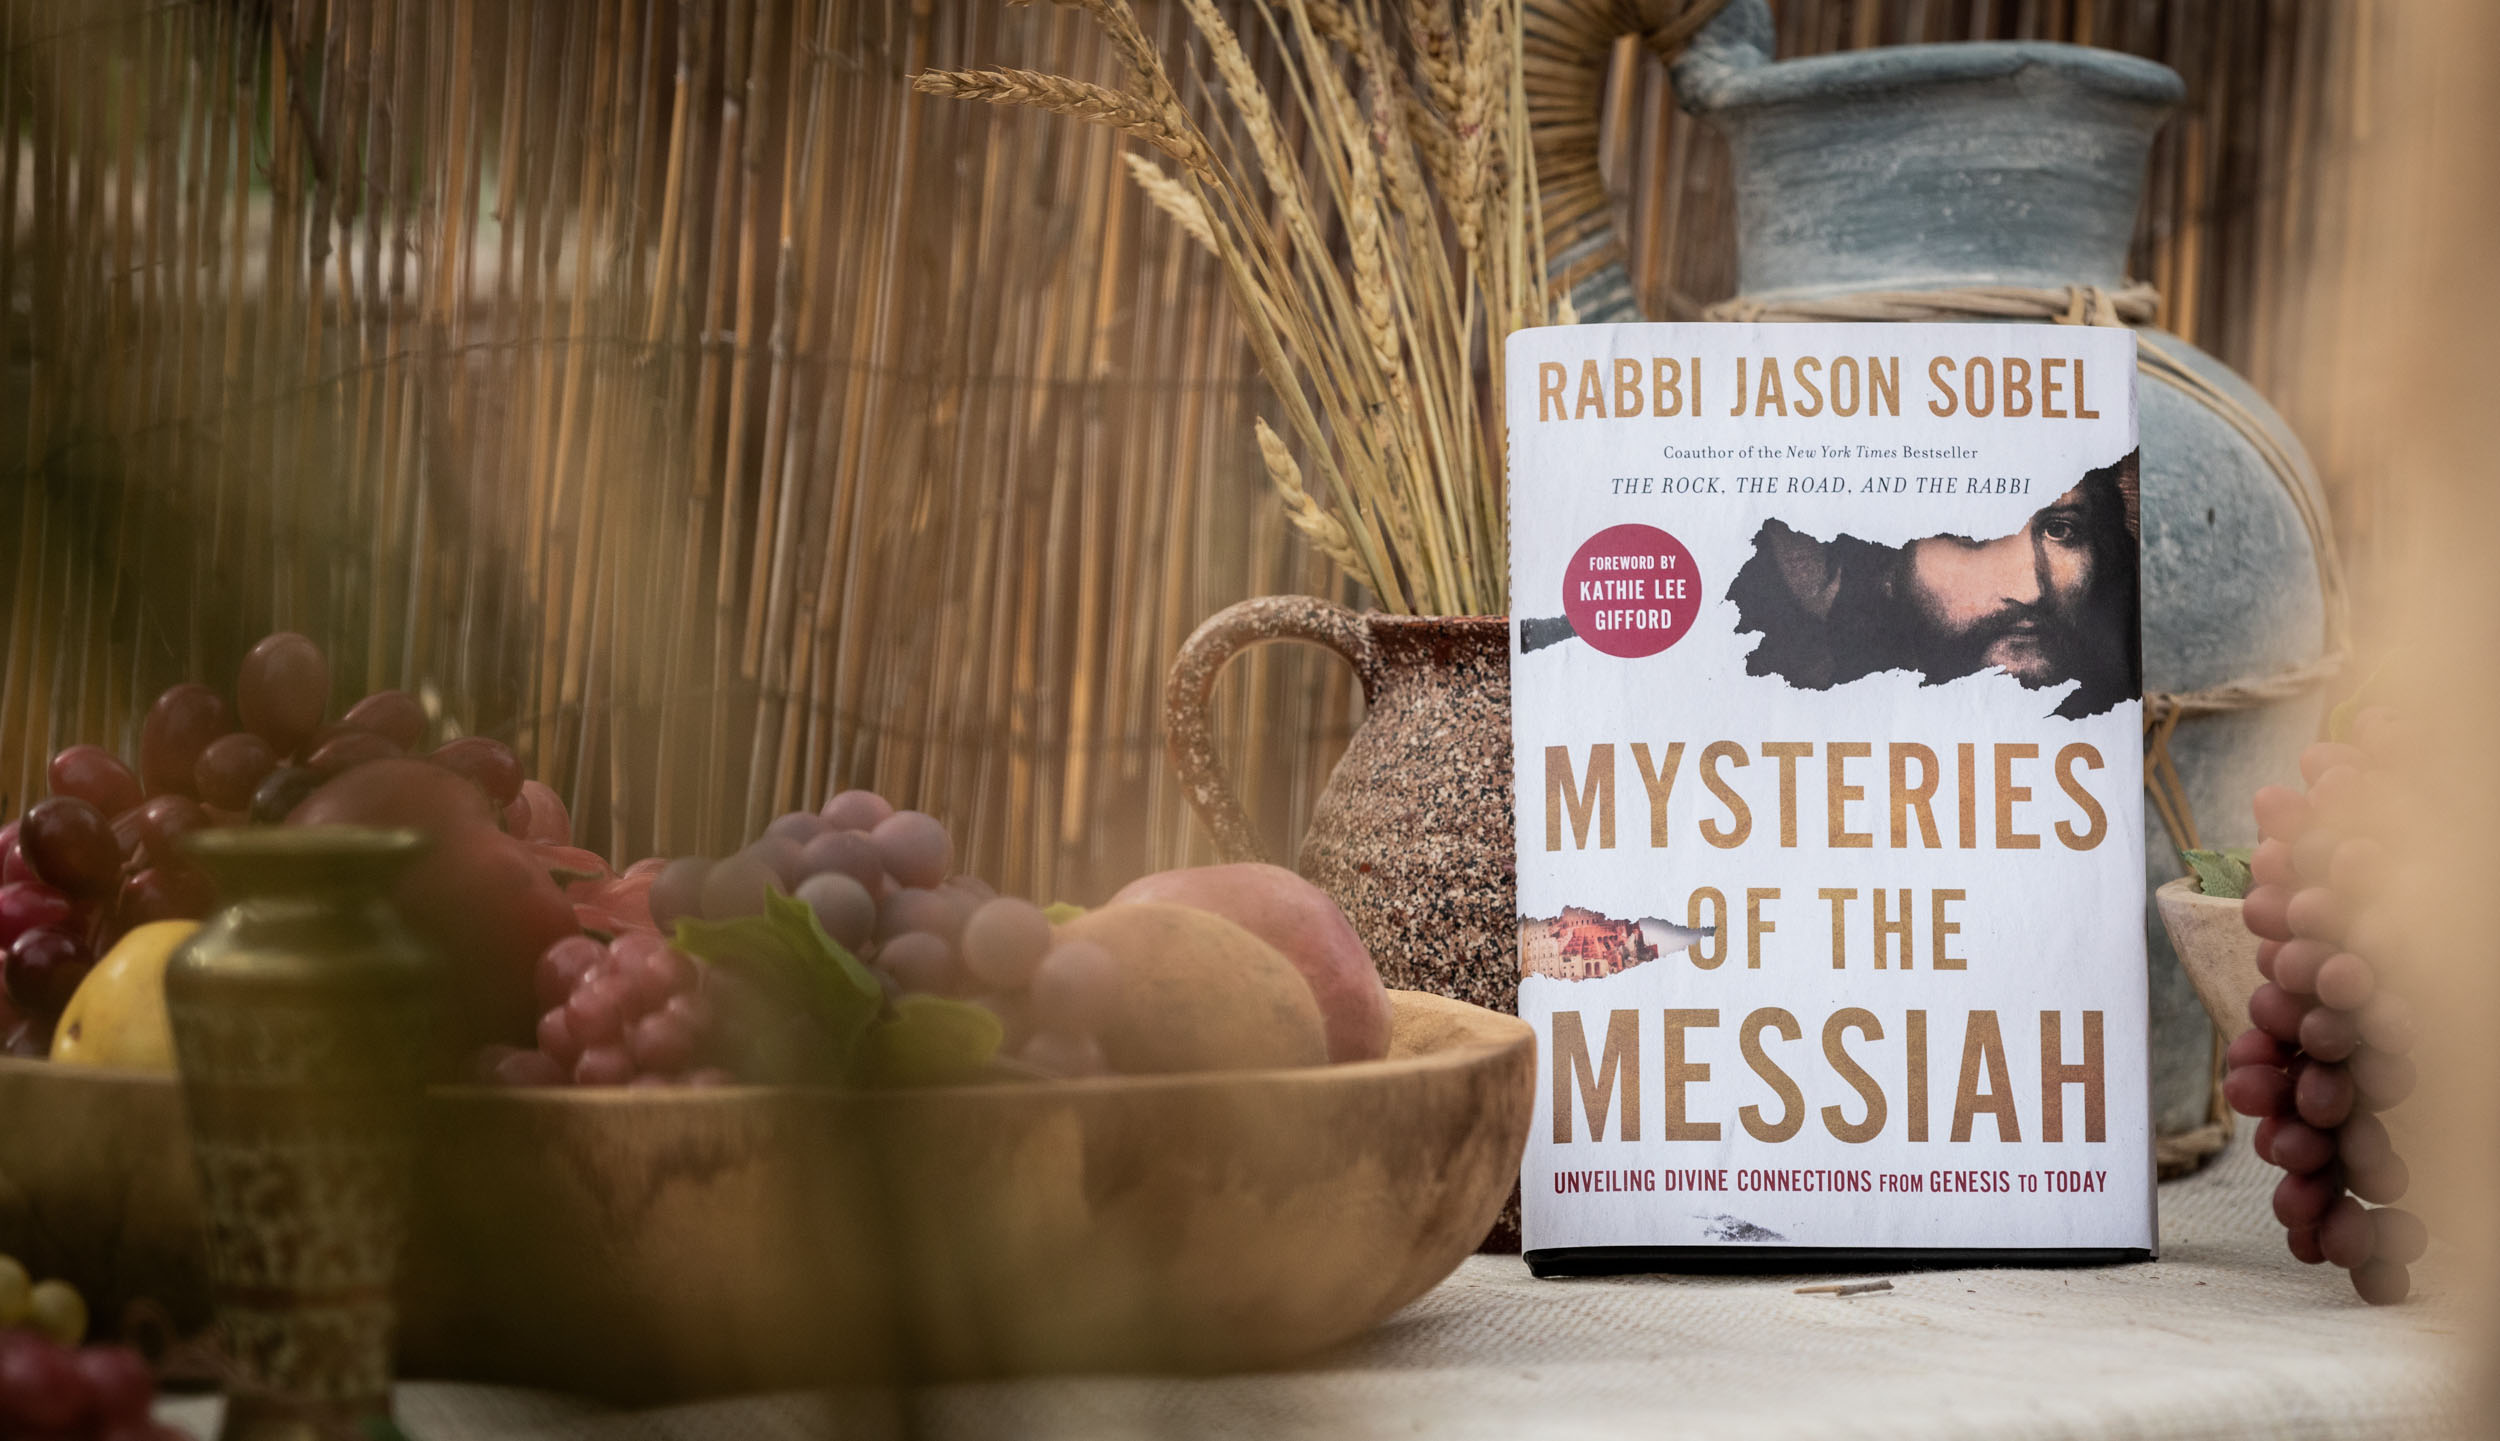 Mysteries of the Messiah environment